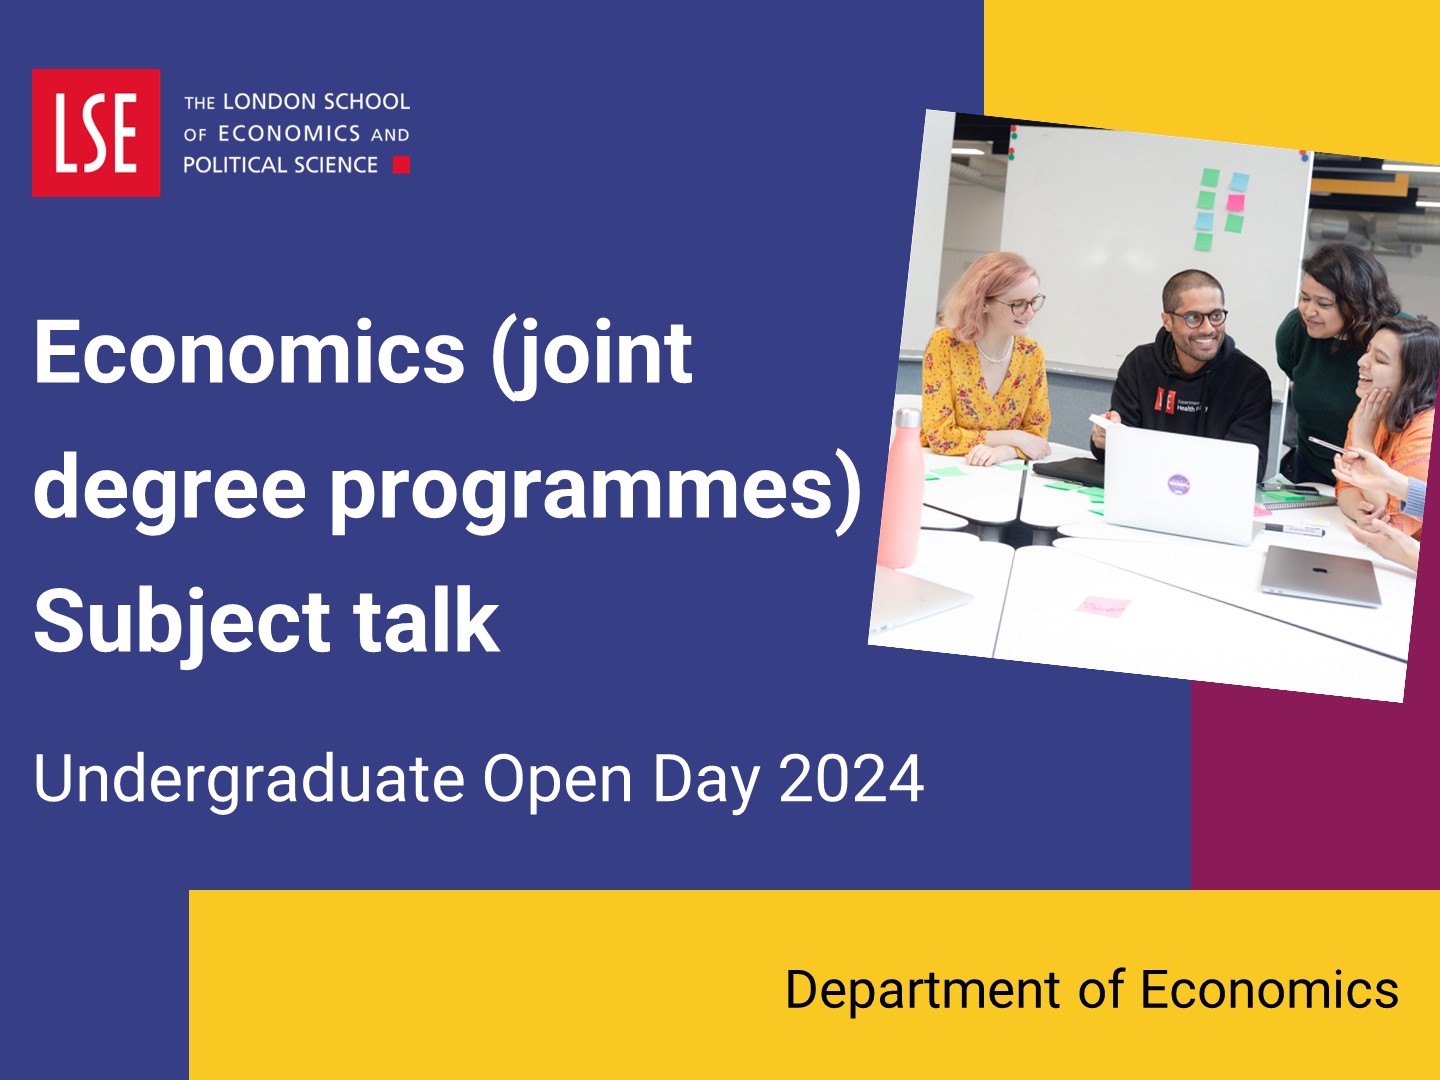 An introduction to studying a joint honours Economics degree at LSE